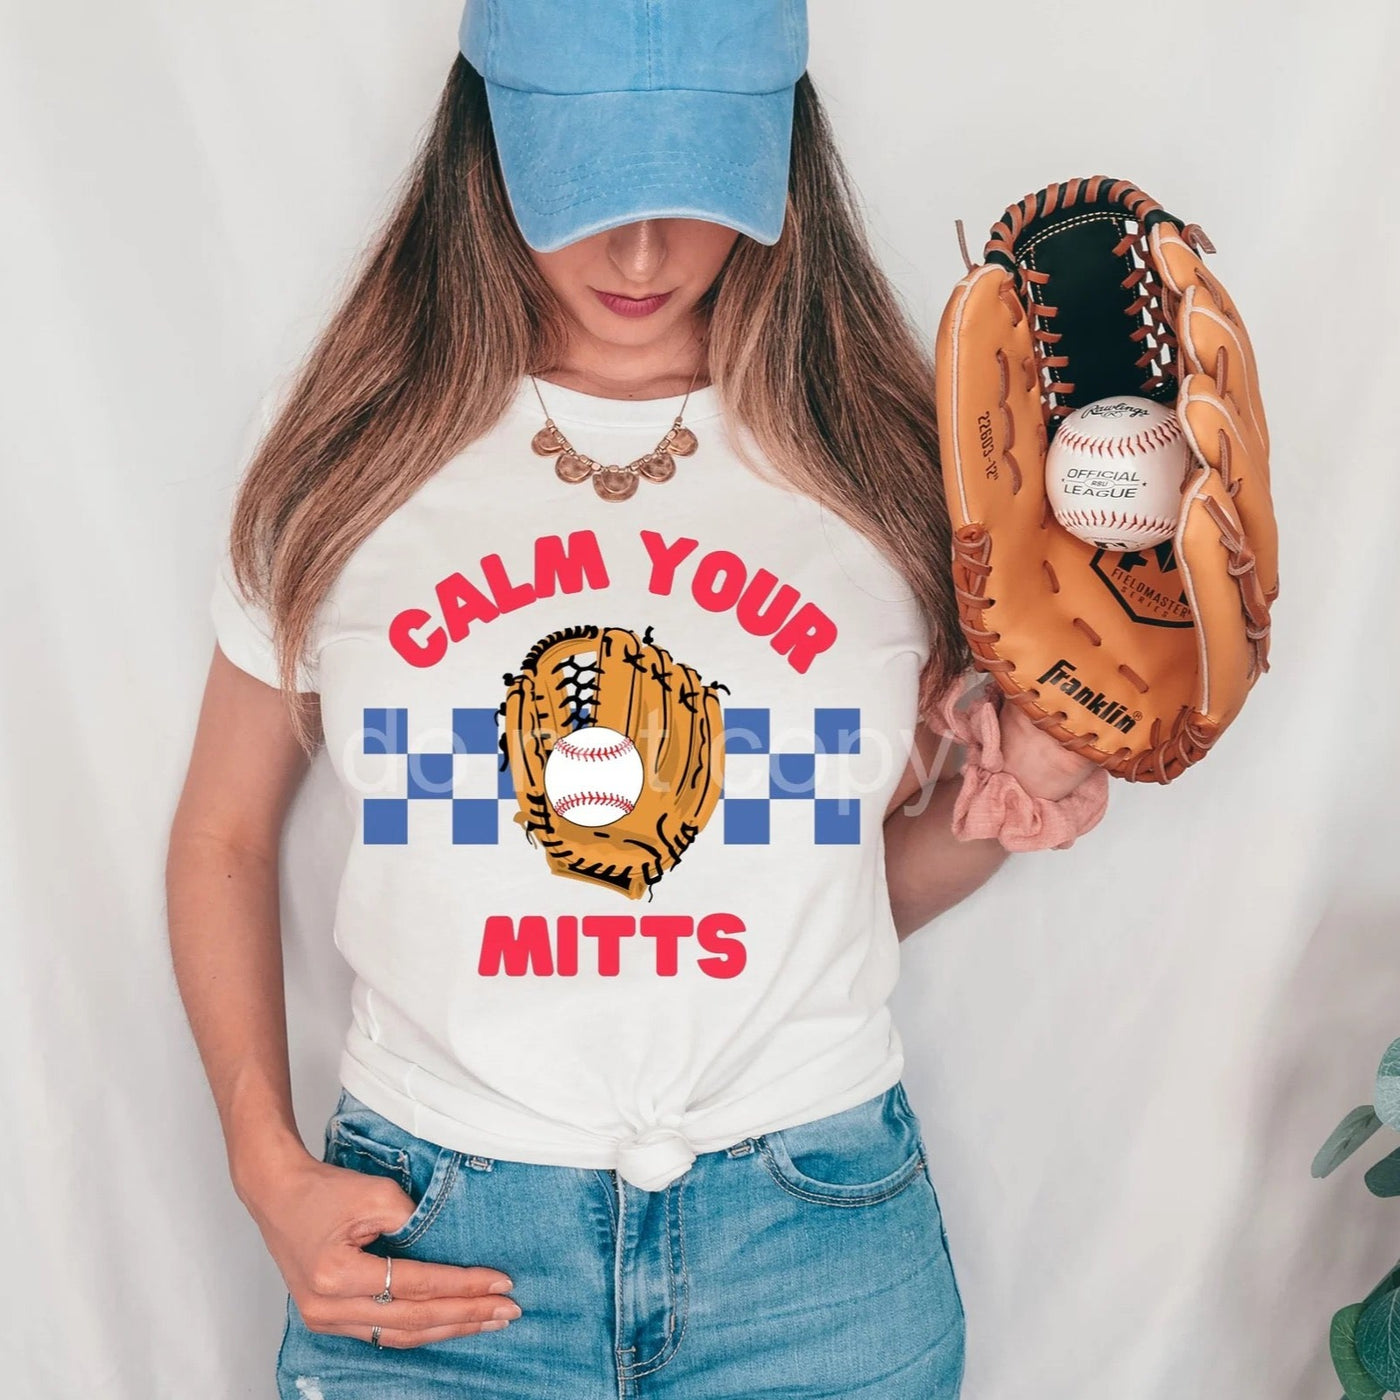 "Calm Your Mits" T-shirt (shown on "White")